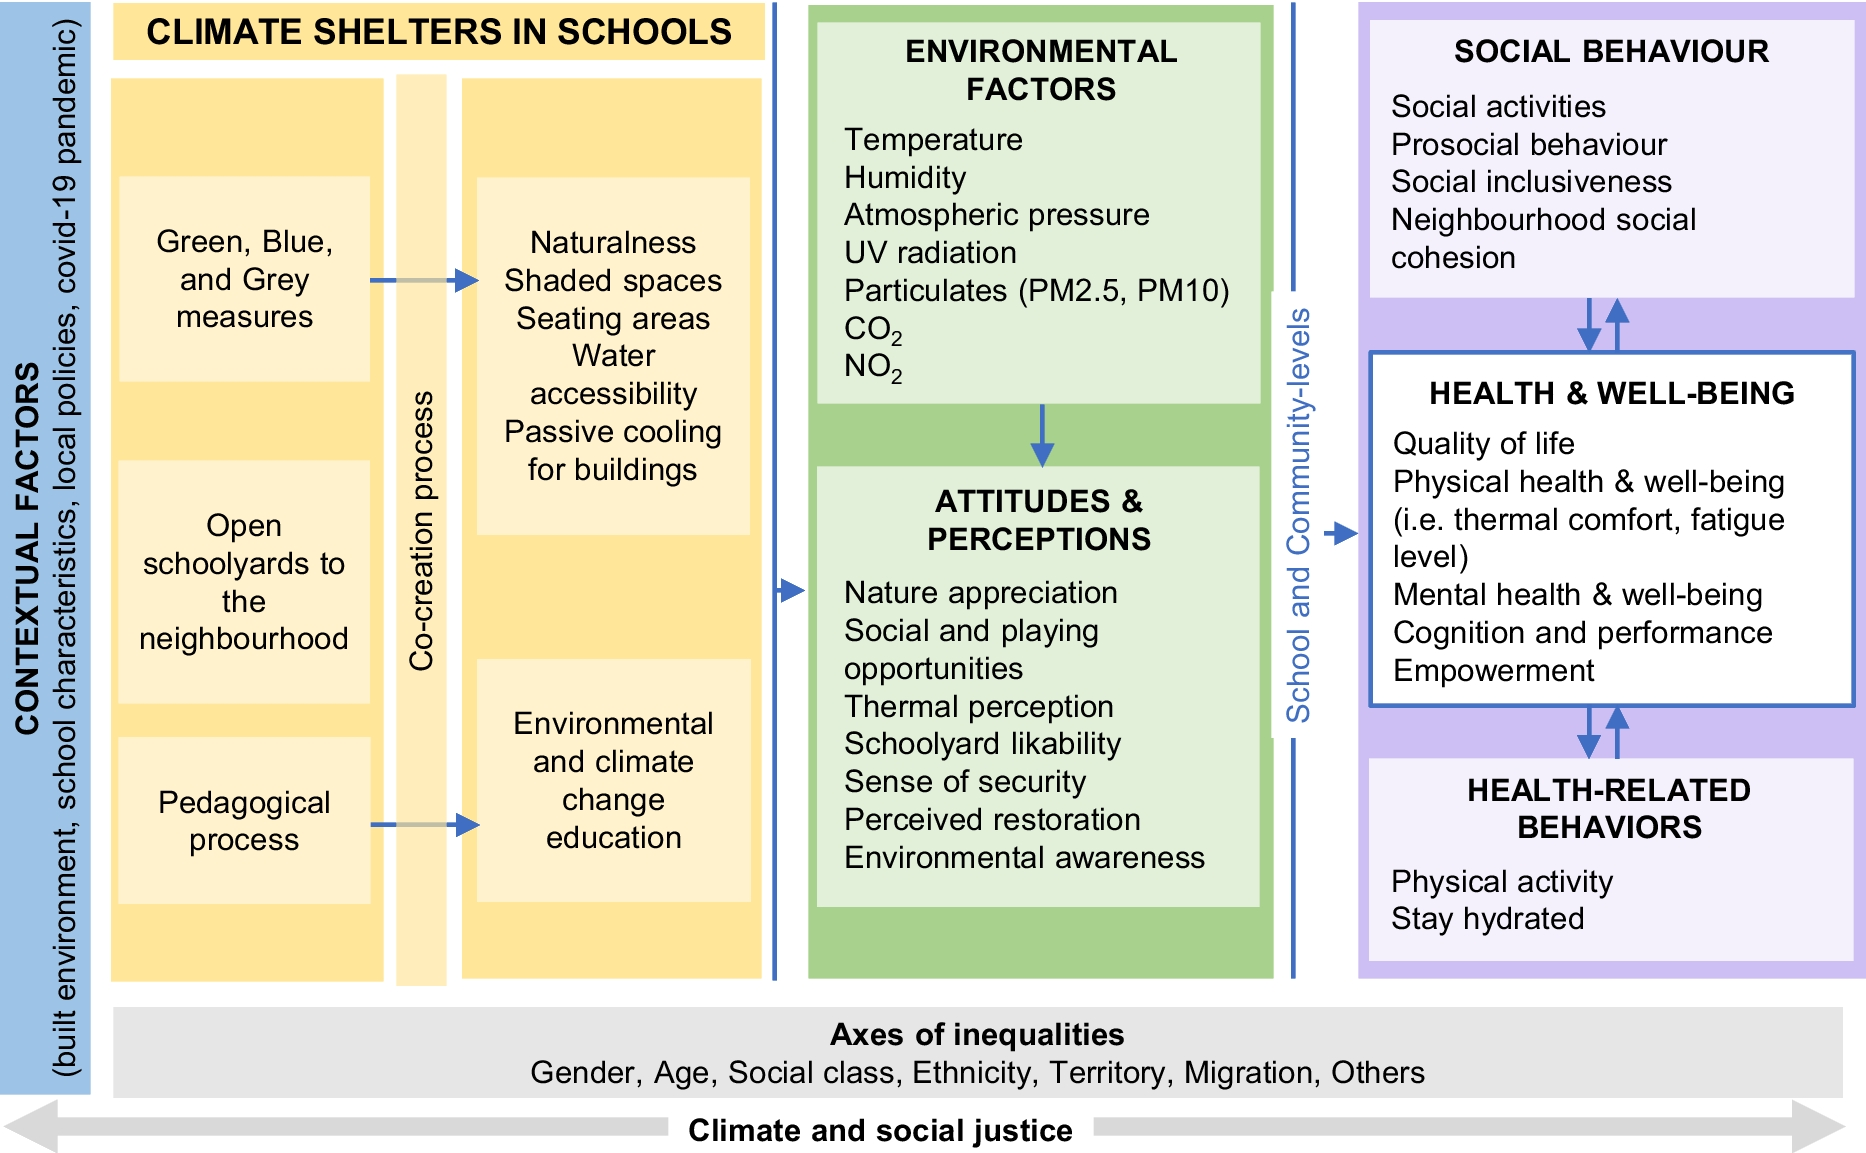 Adapting Schools to Climate Change with Green, Blue, and Grey Measures in Barcelona: Study Protocol of a Mixed-Method Evaluation